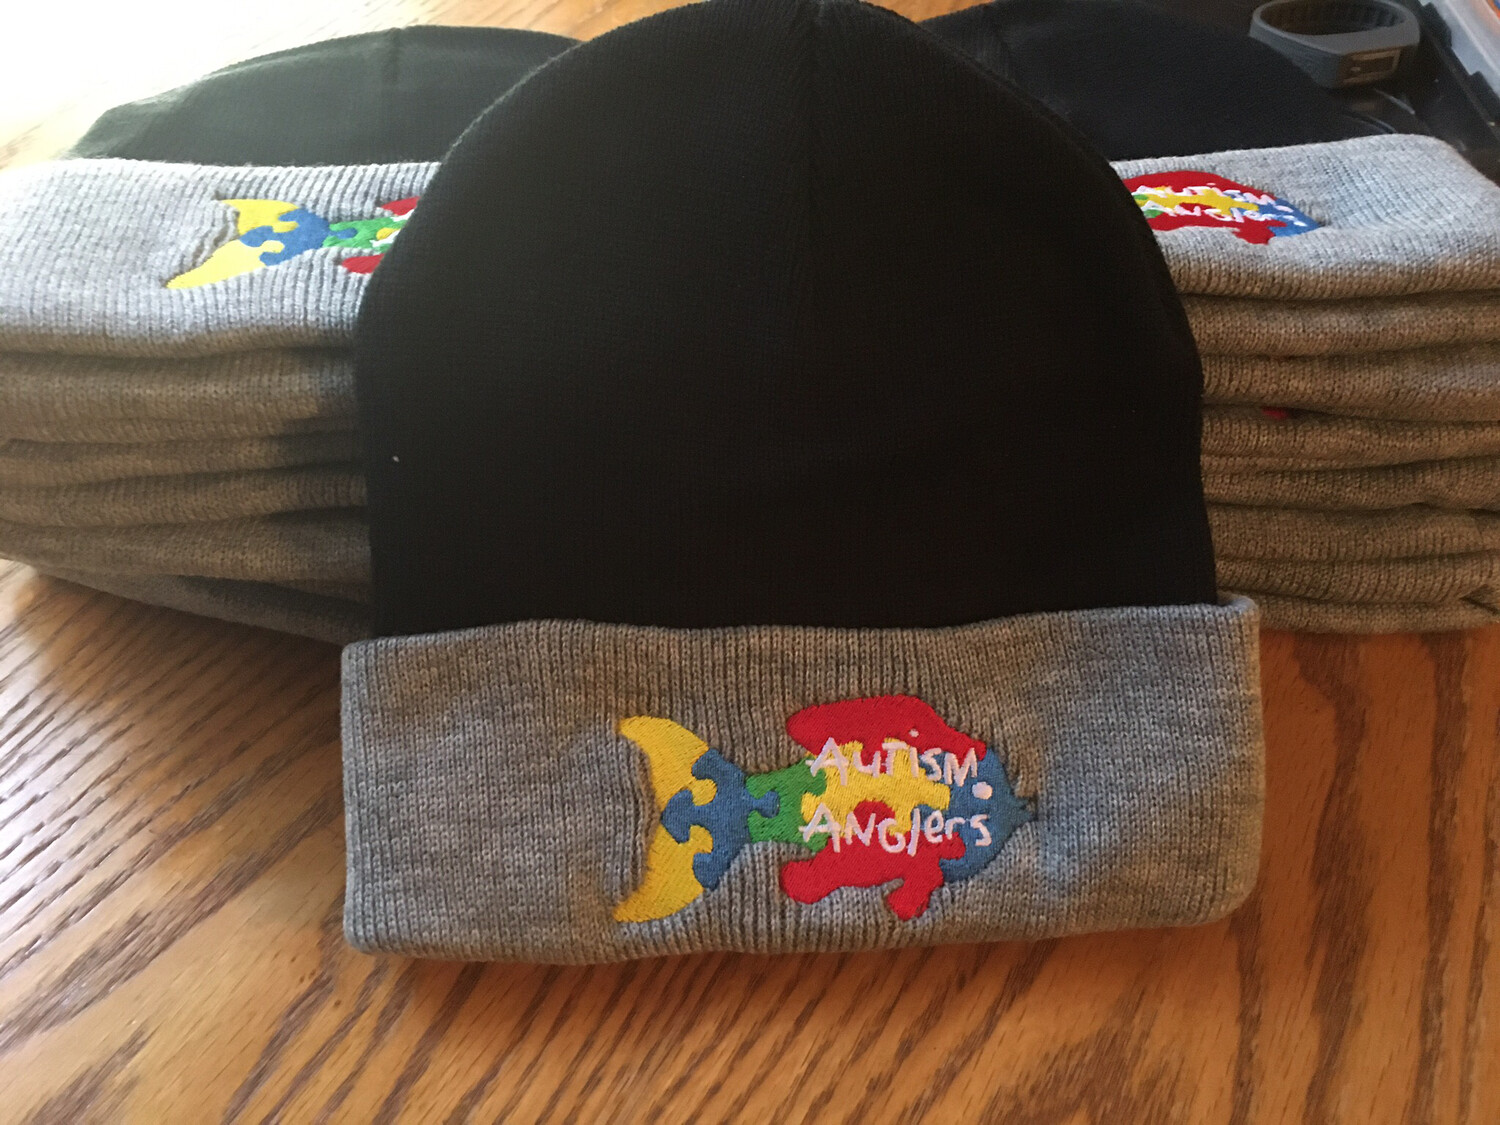 Autism Anglers Knit Cap